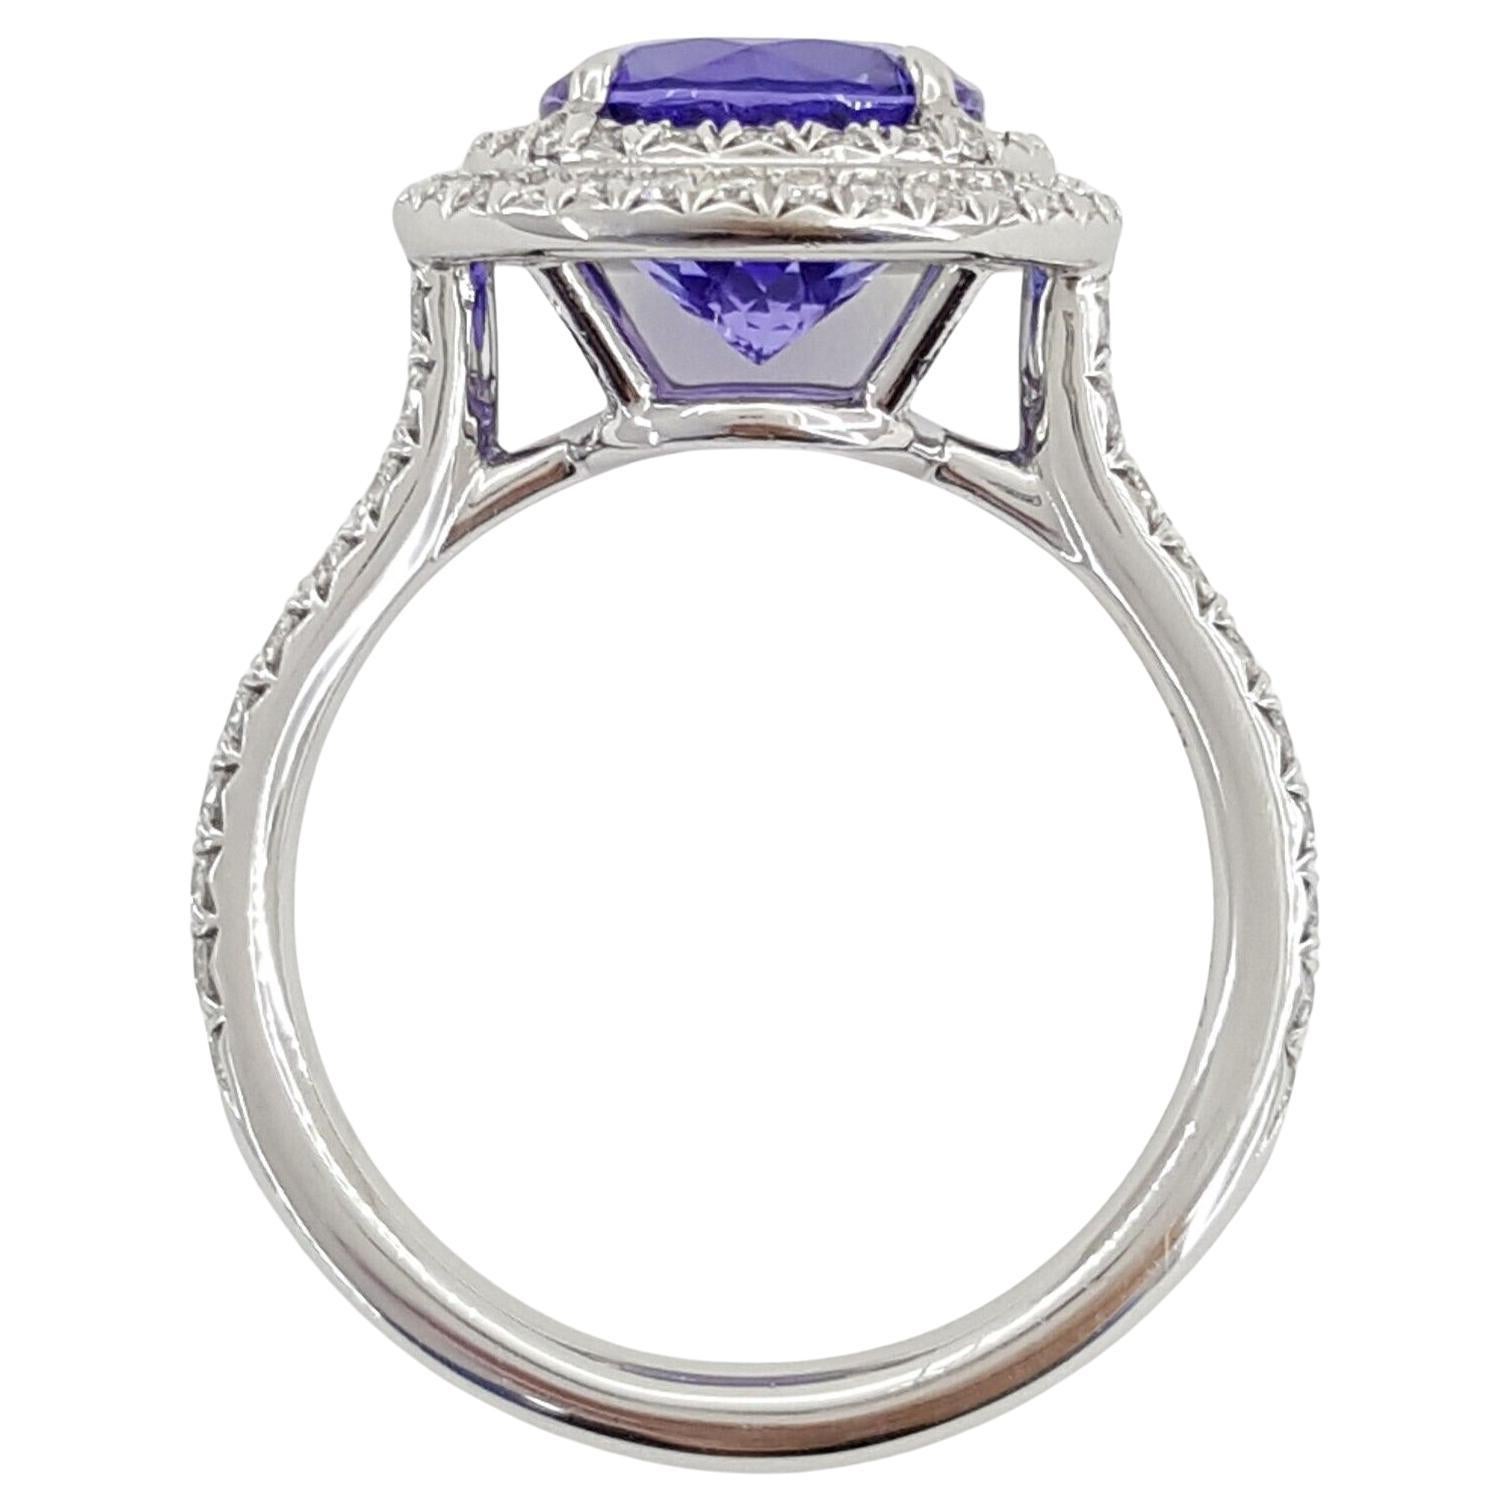 Tiffany & Co. Platinum Soleste® 2.63 ct Round Excellent Cut Diamond Double Halo Engagement Ring.
The ring weighs 6.5 grams, size 6, the center stone is a Natural Round Brilliant Cut Tanzanite weighing approximately 2.15 ct, measuring 8.04 - 8.1 x